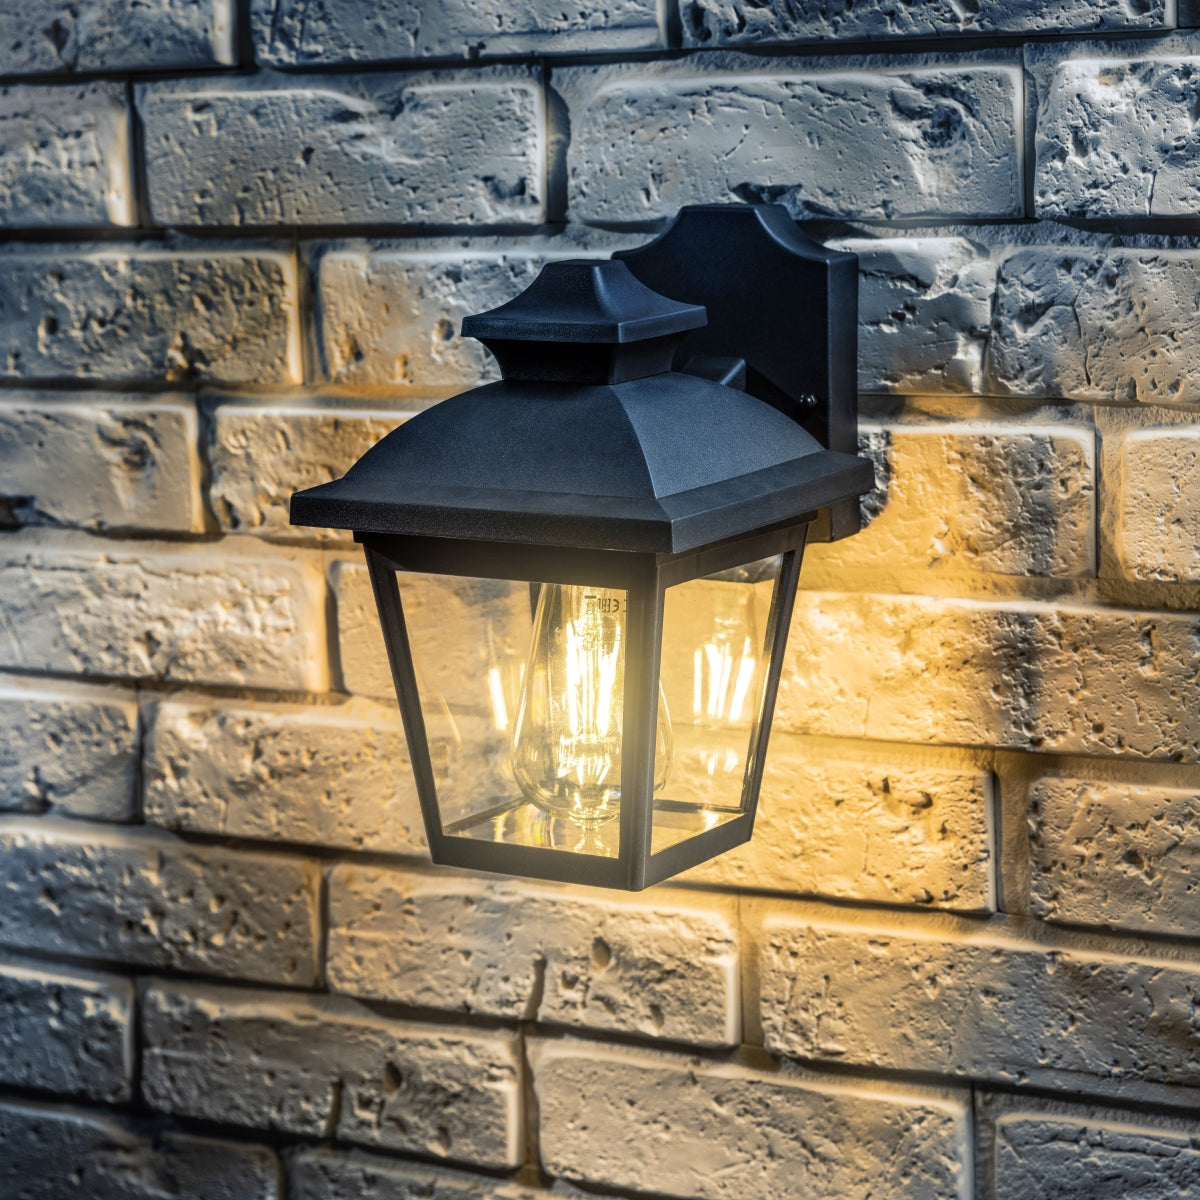 Our Hope lantern wall light delivers on style and durability and is a smart choice for your exterior lighting. With its black polycarbonate construction teamed with polycarbonate panes, this lantern is hardwearing and rust and weatherproof. Built for life outdoors, it has an IP44 rating which means it can withstand the harshest of weather conditions. For sophisticated yet robust outdoor lighting, our Yasmin black outdoor traditional lantern is a strong contender.